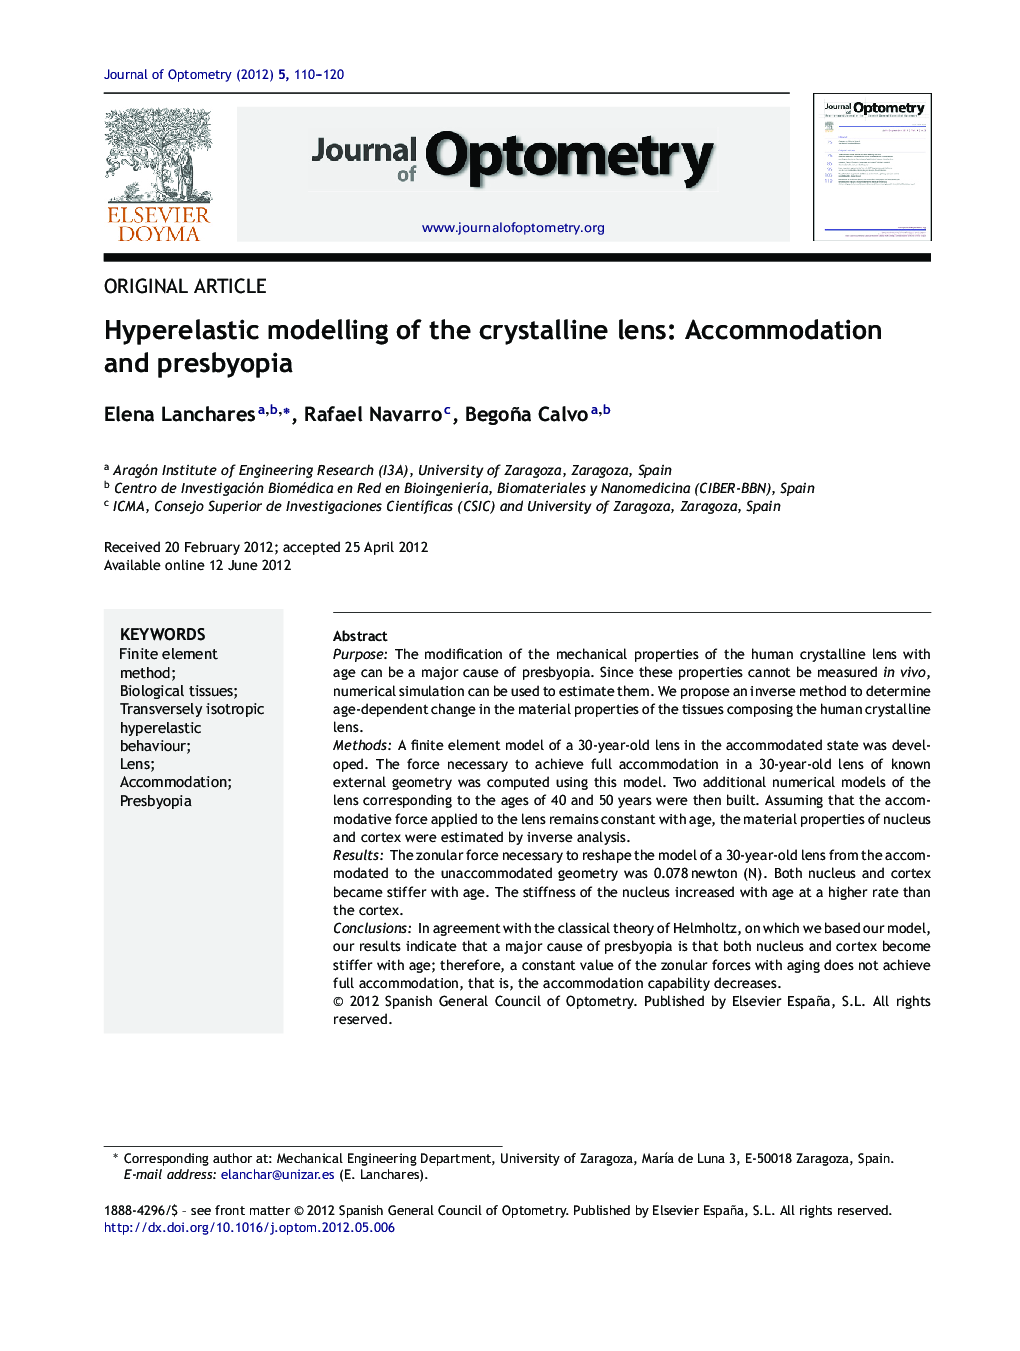 Hyperelastic modelling of the crystalline lens: Accommodation and presbyopia